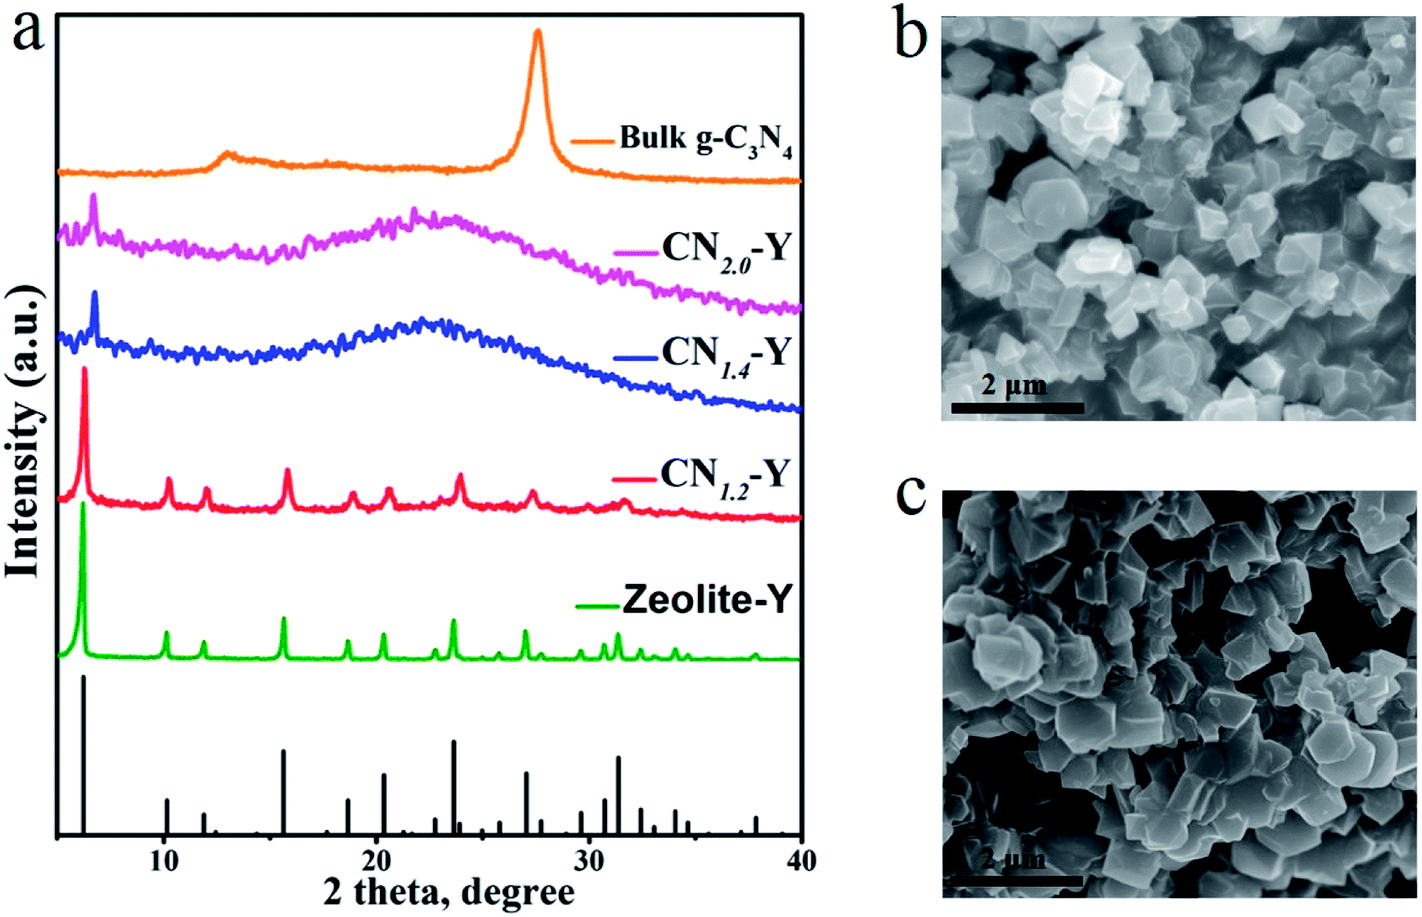 Confining The Polymerization Degree Of Graphitic Carbon Nitride In Porous Zeolite Y And Its Luminescence Rsc Advances Rsc Publishing Doi 10 1039 C8rah